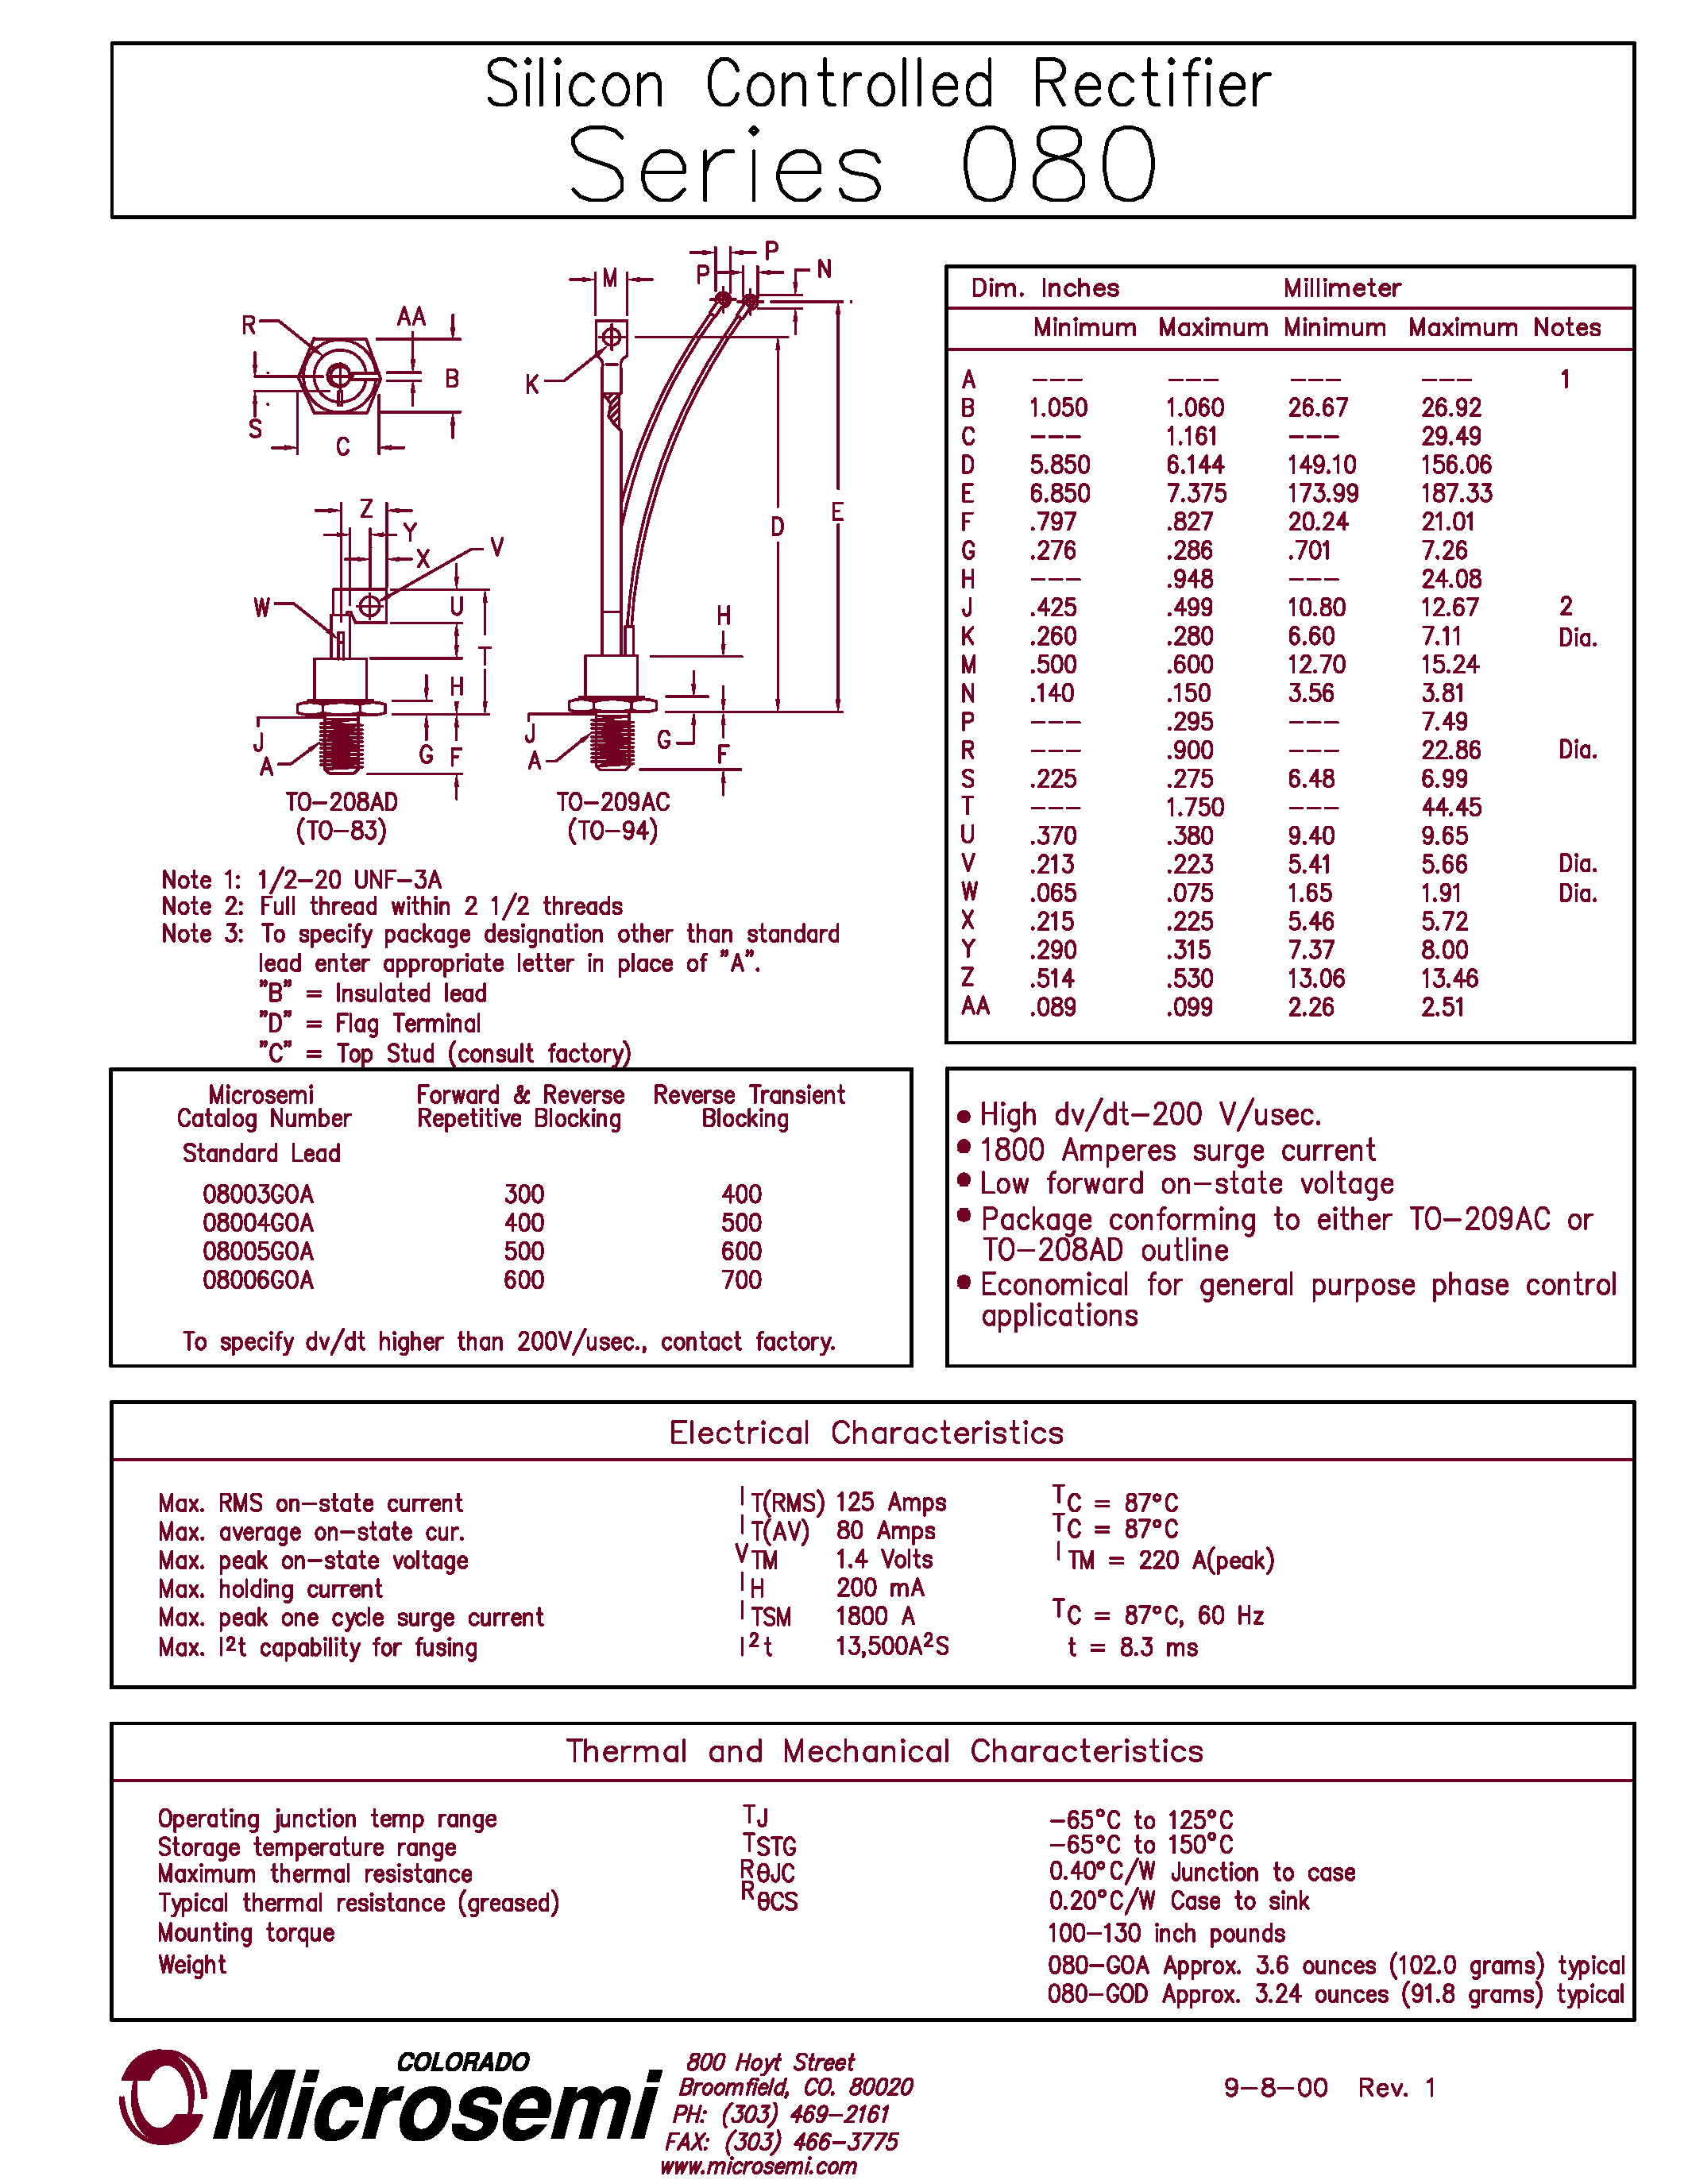 Datasheet 08006GOB - Silicon Controlled Rectifier page 1